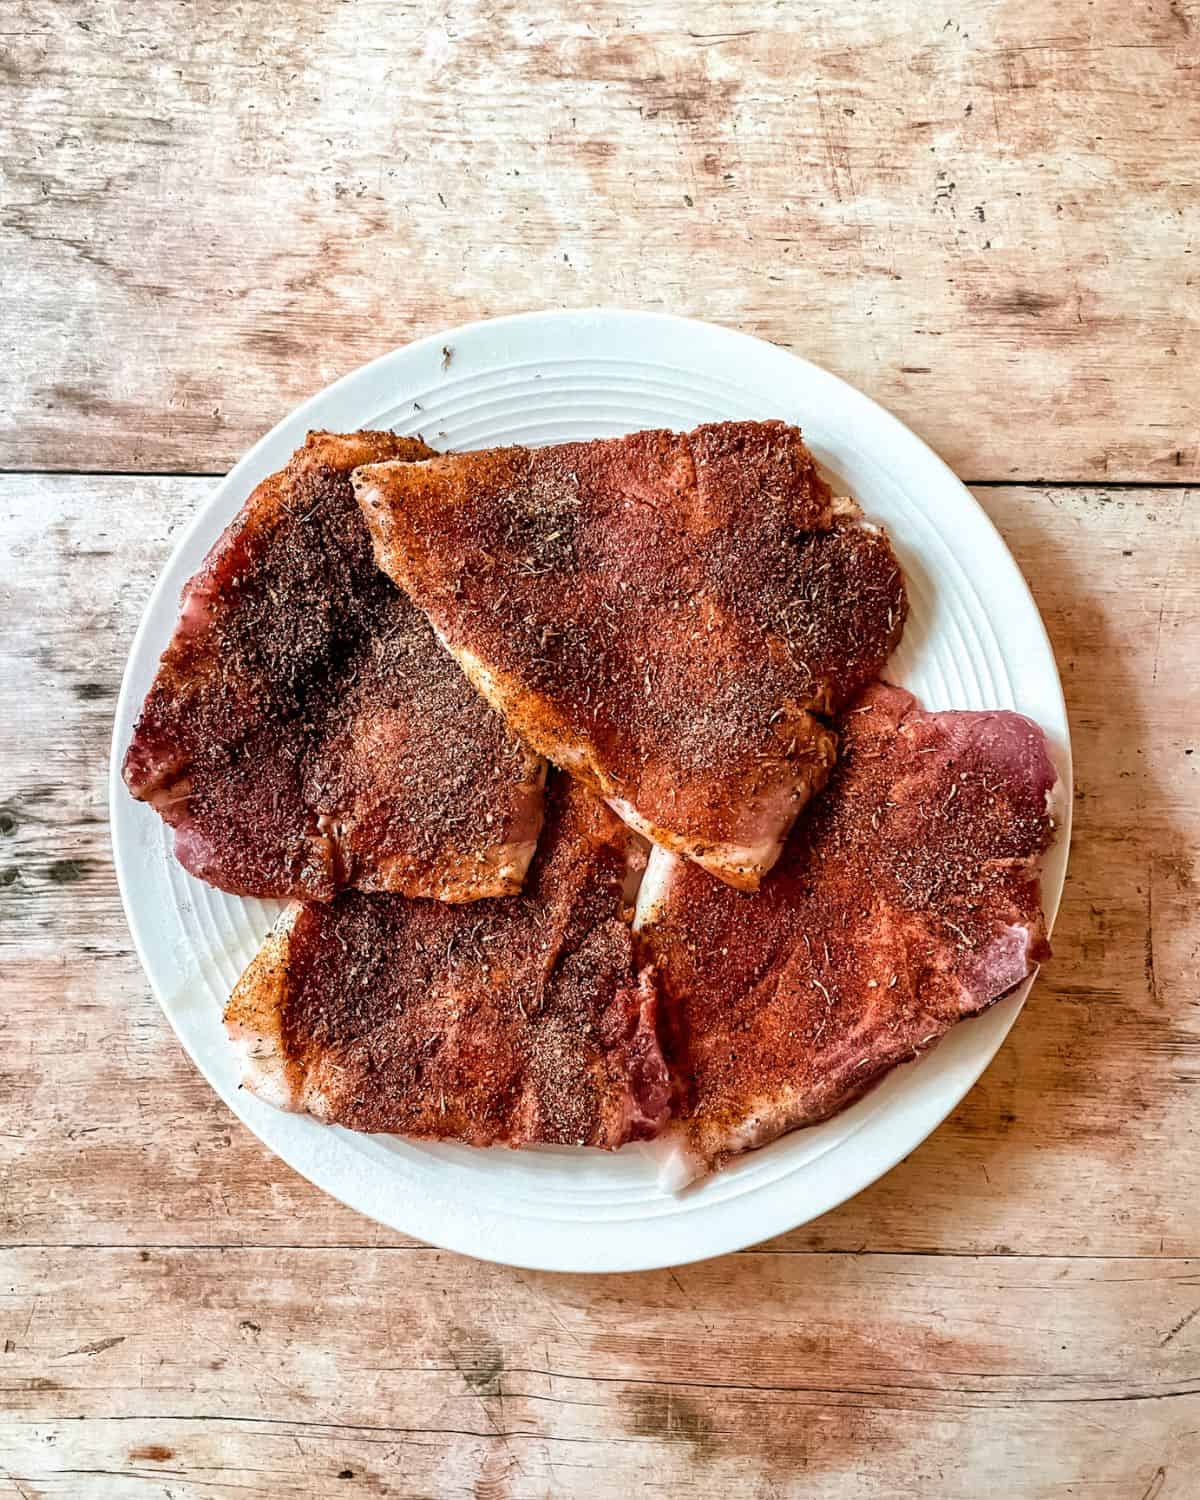 Raw pork chops, seasoned with blackening blend, on a white plate.